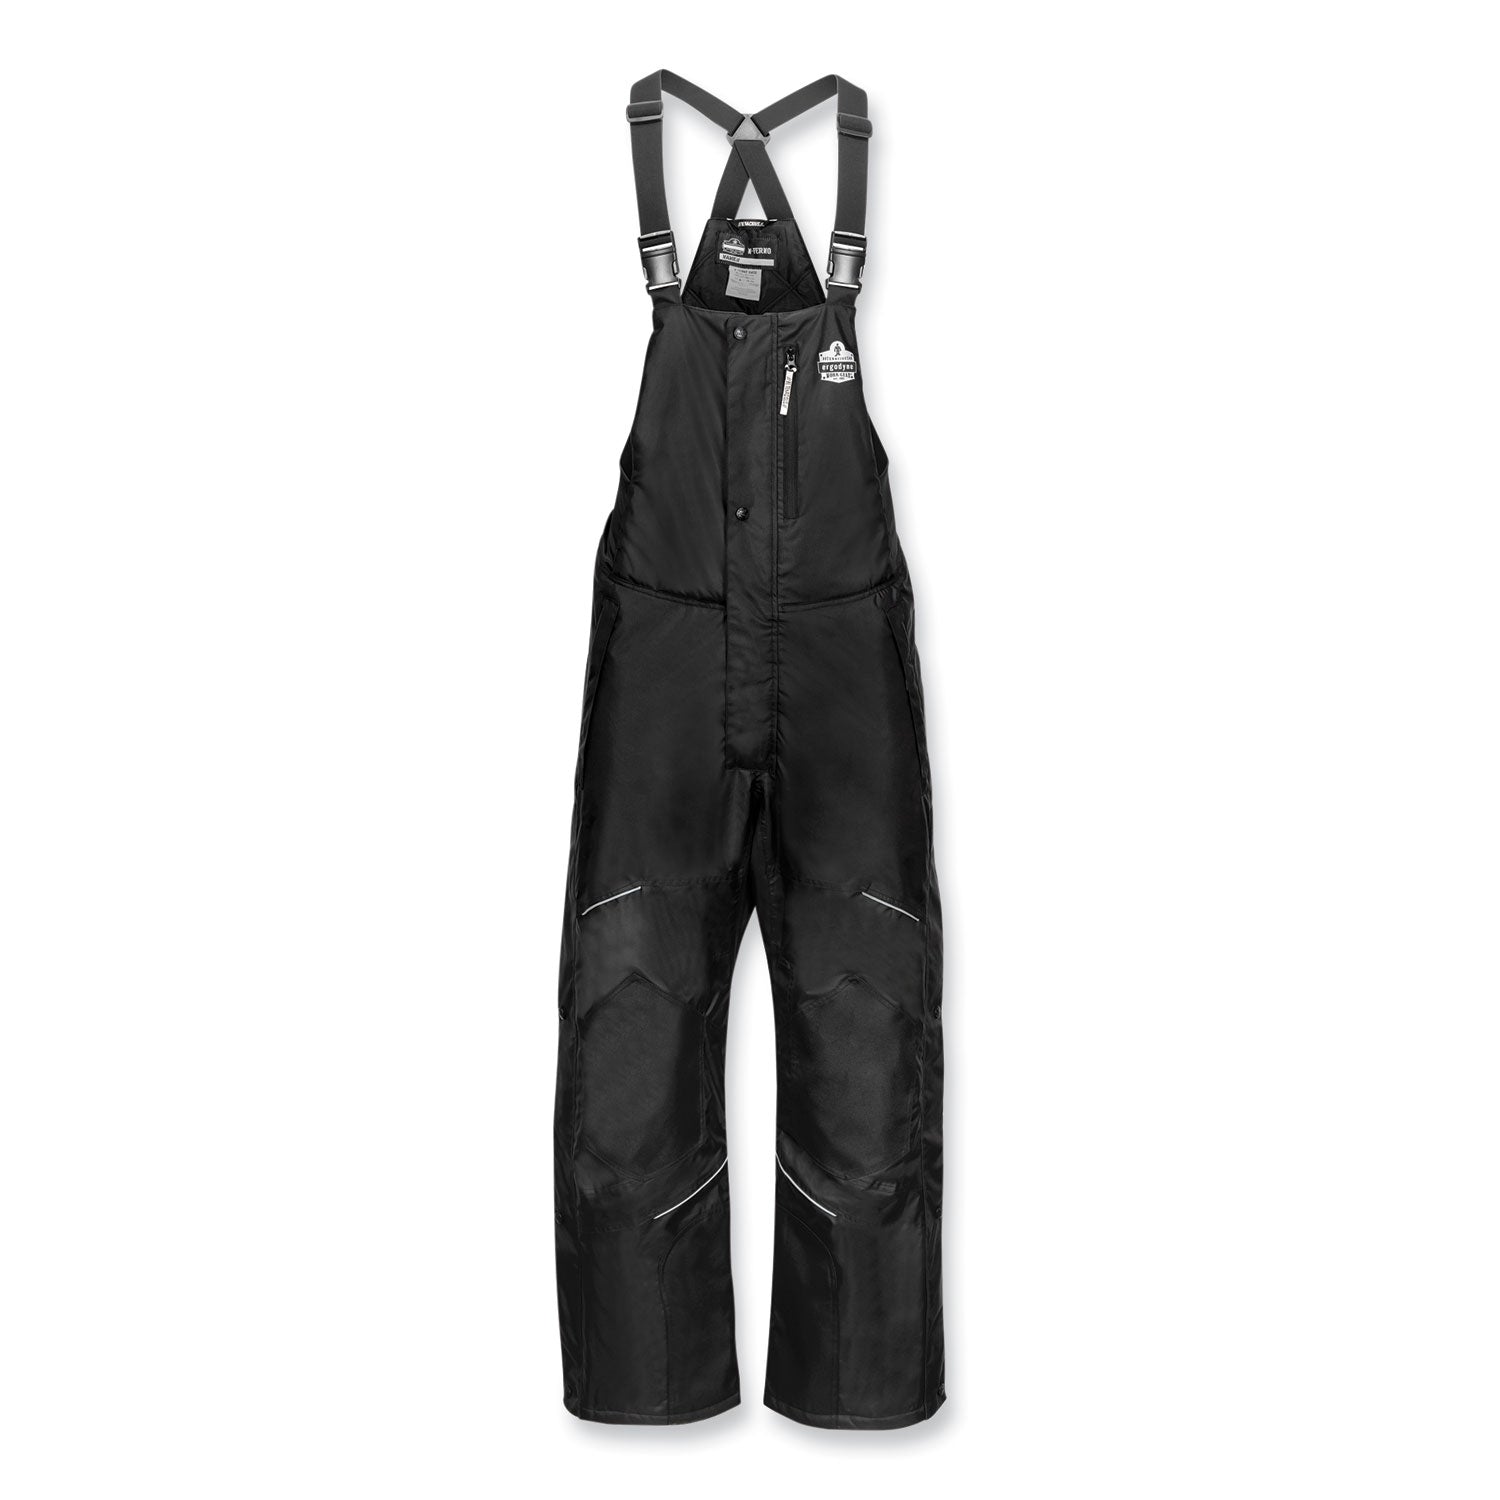 n-ferno-6472-thermal-bib-with-300d-oxford-shell-4x-large-black-ships-in-1-3-business-days_ego41228 - 1